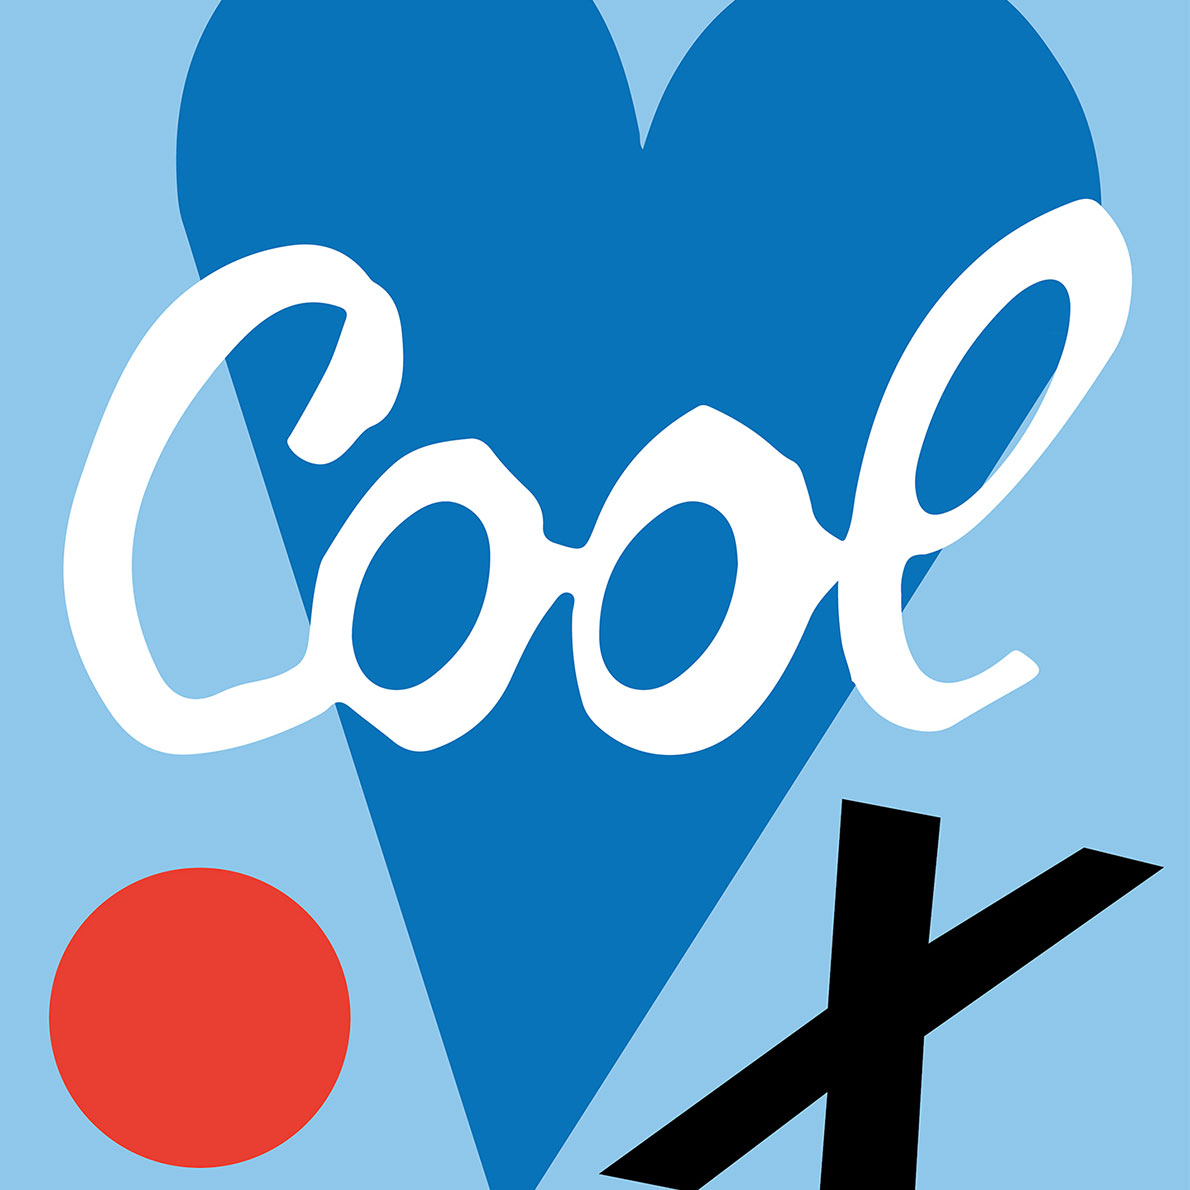 The word “Cool” written in white on a blue background.